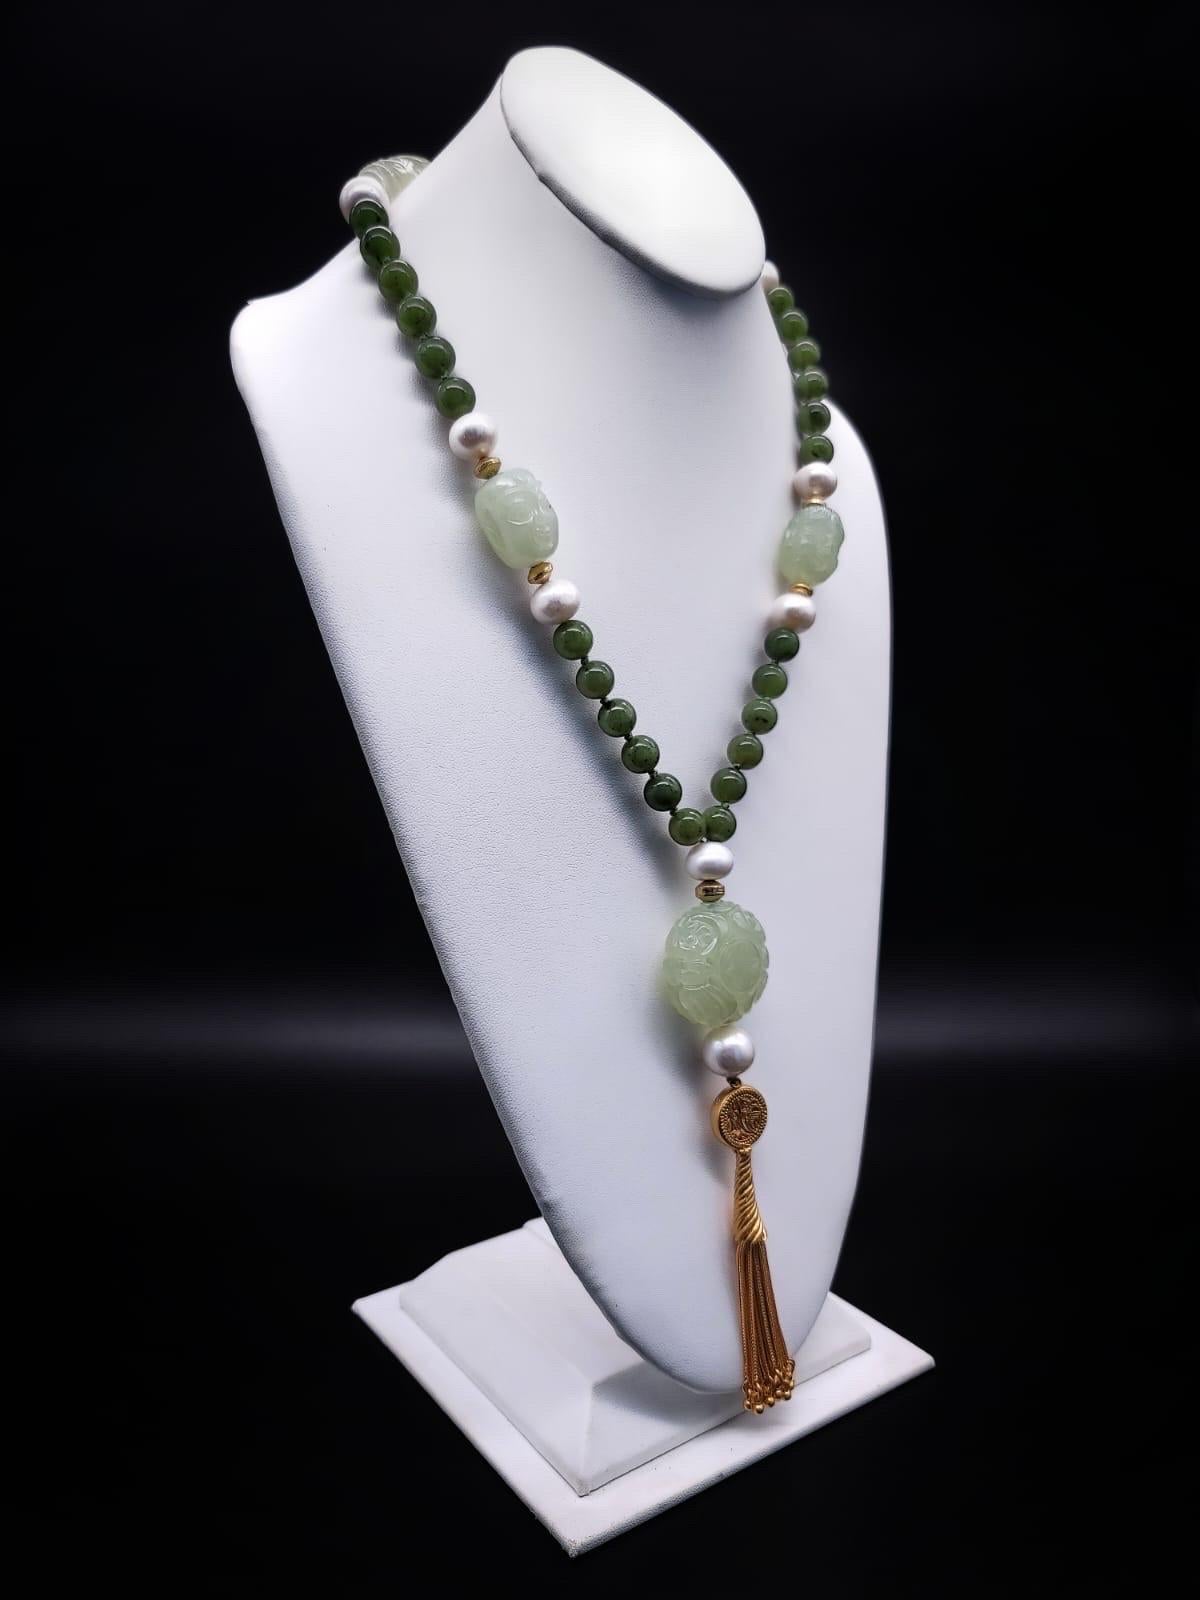 One-of-a-Kind

Jade, desired for its rich heritage, as well as for its beauty and durability, is showcased in a 40” rope of mixed Nephrite and Jadeite (both forms of Jade) as well as Pearls and vermeil.
The Nephrite Chinese carved beads are Shou